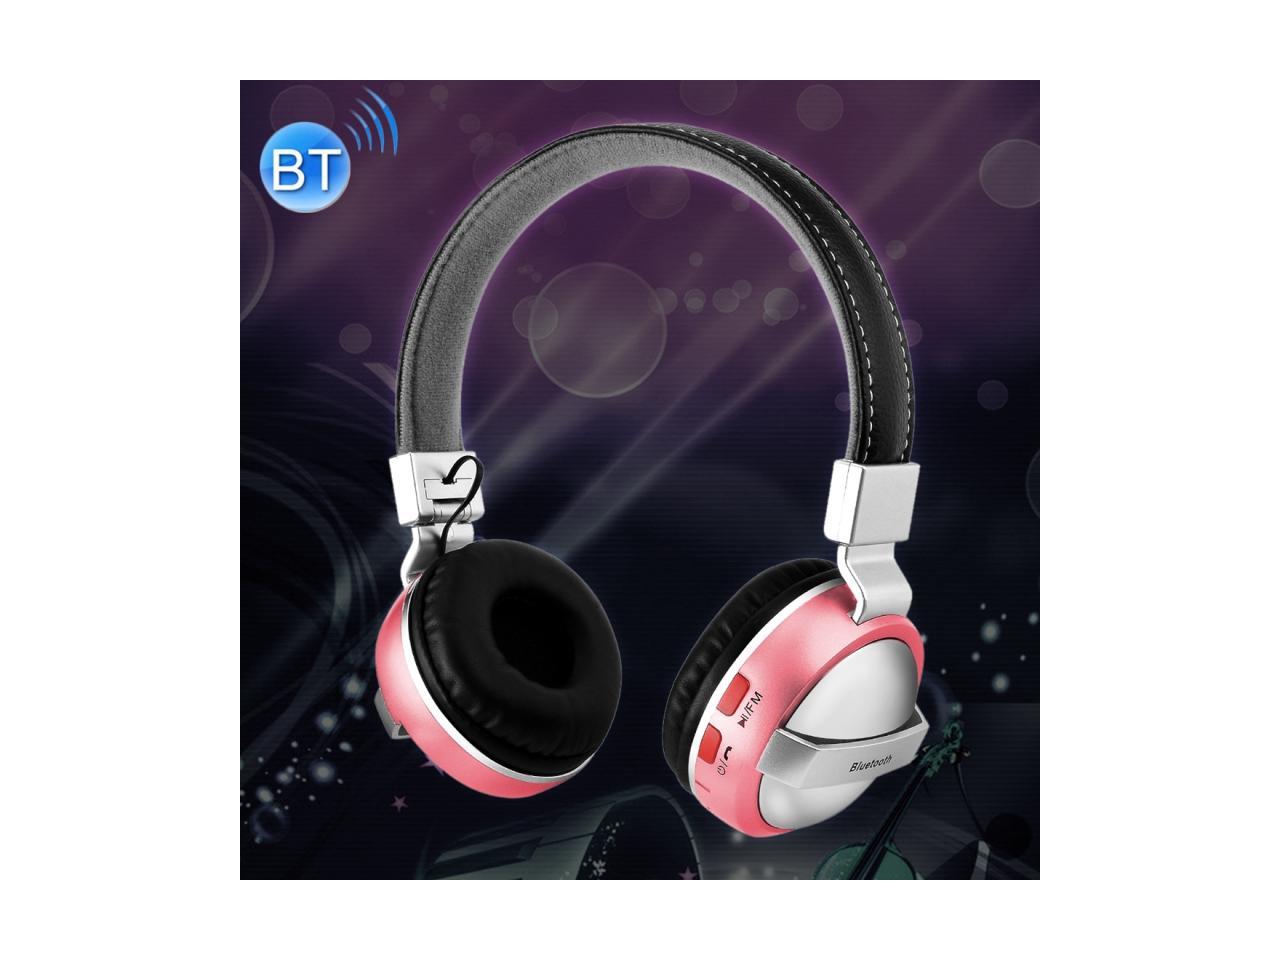 BTH-868 Stereo Sound Quality V4.2 Bluetooth Headphone, Bluetooth Distance: 10m, Support 3.5mm Audio Input & FM, for iPhone, Samsung, HTC, Sony and other Smartphones (Pink)